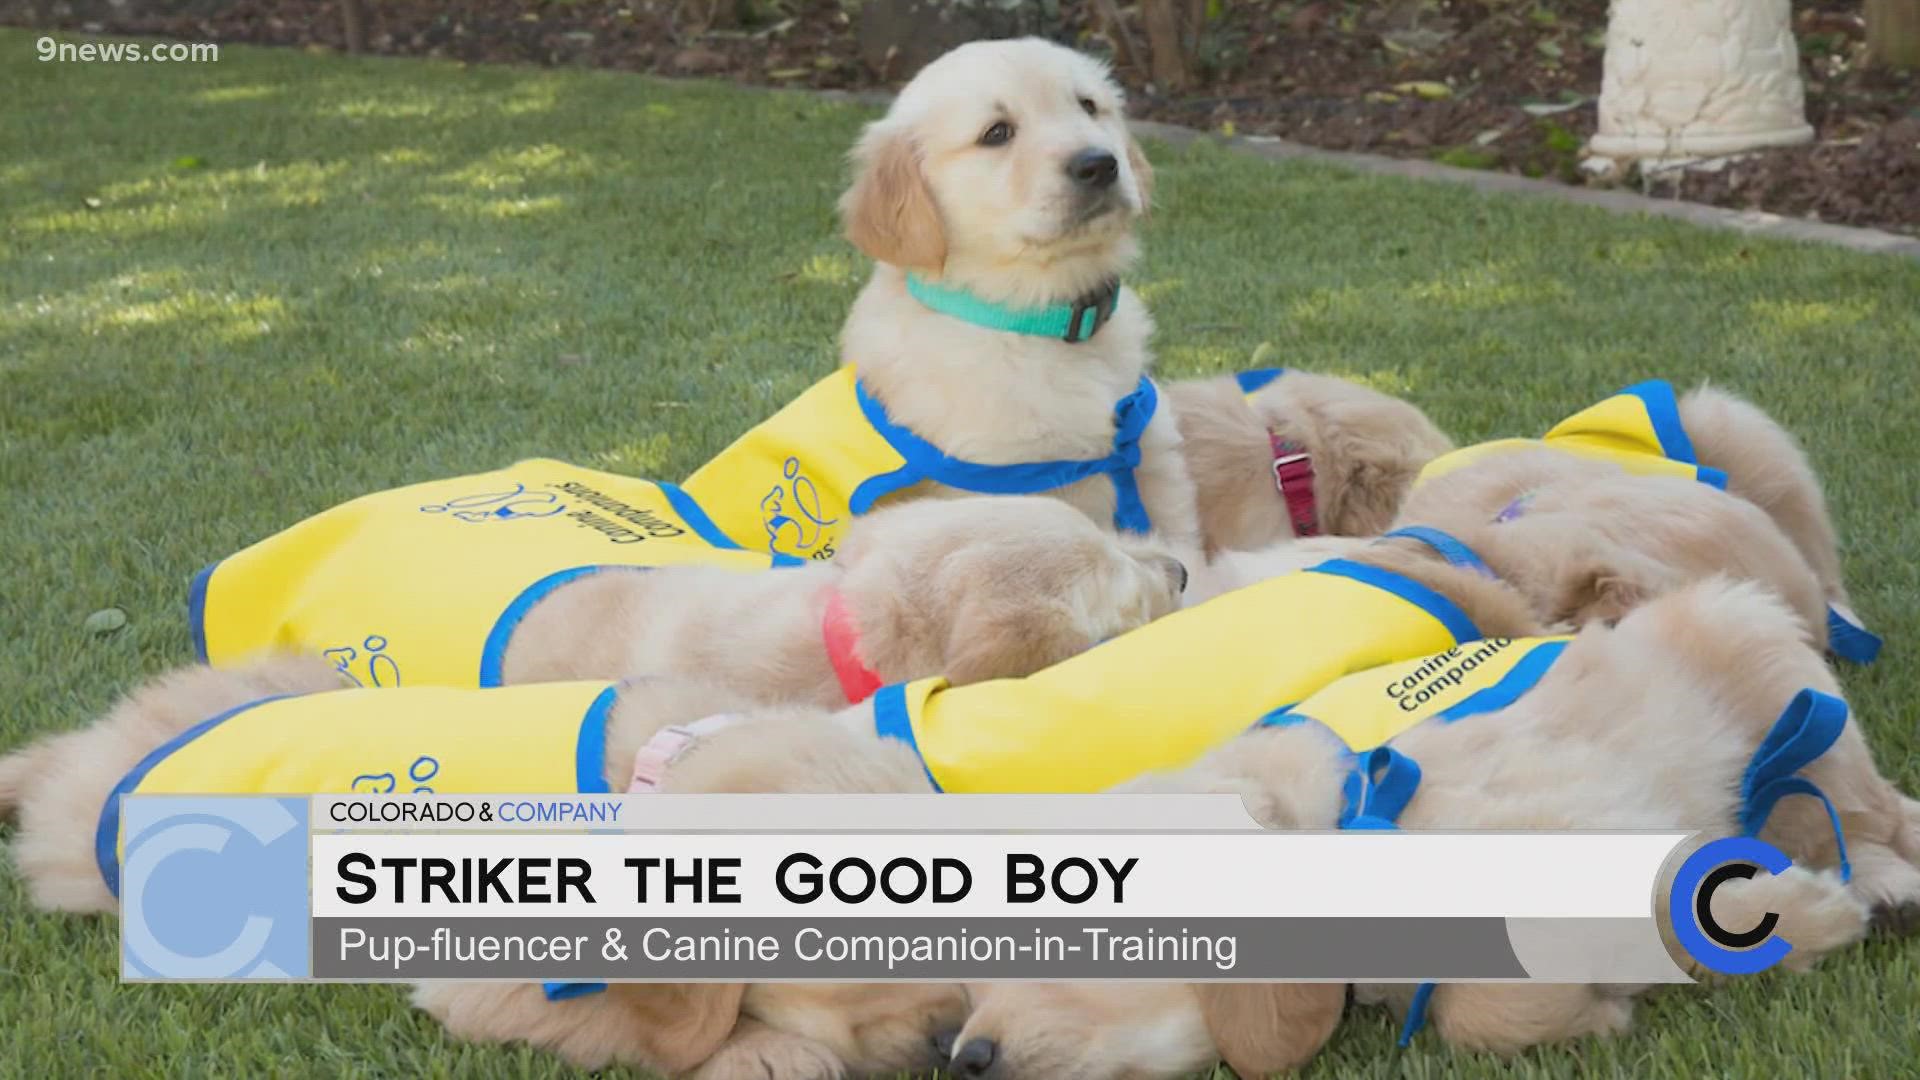 Check out Striker at the Switchbacks games next season! Learn more about the amazing work being done at Canine Companions at Canine.org.